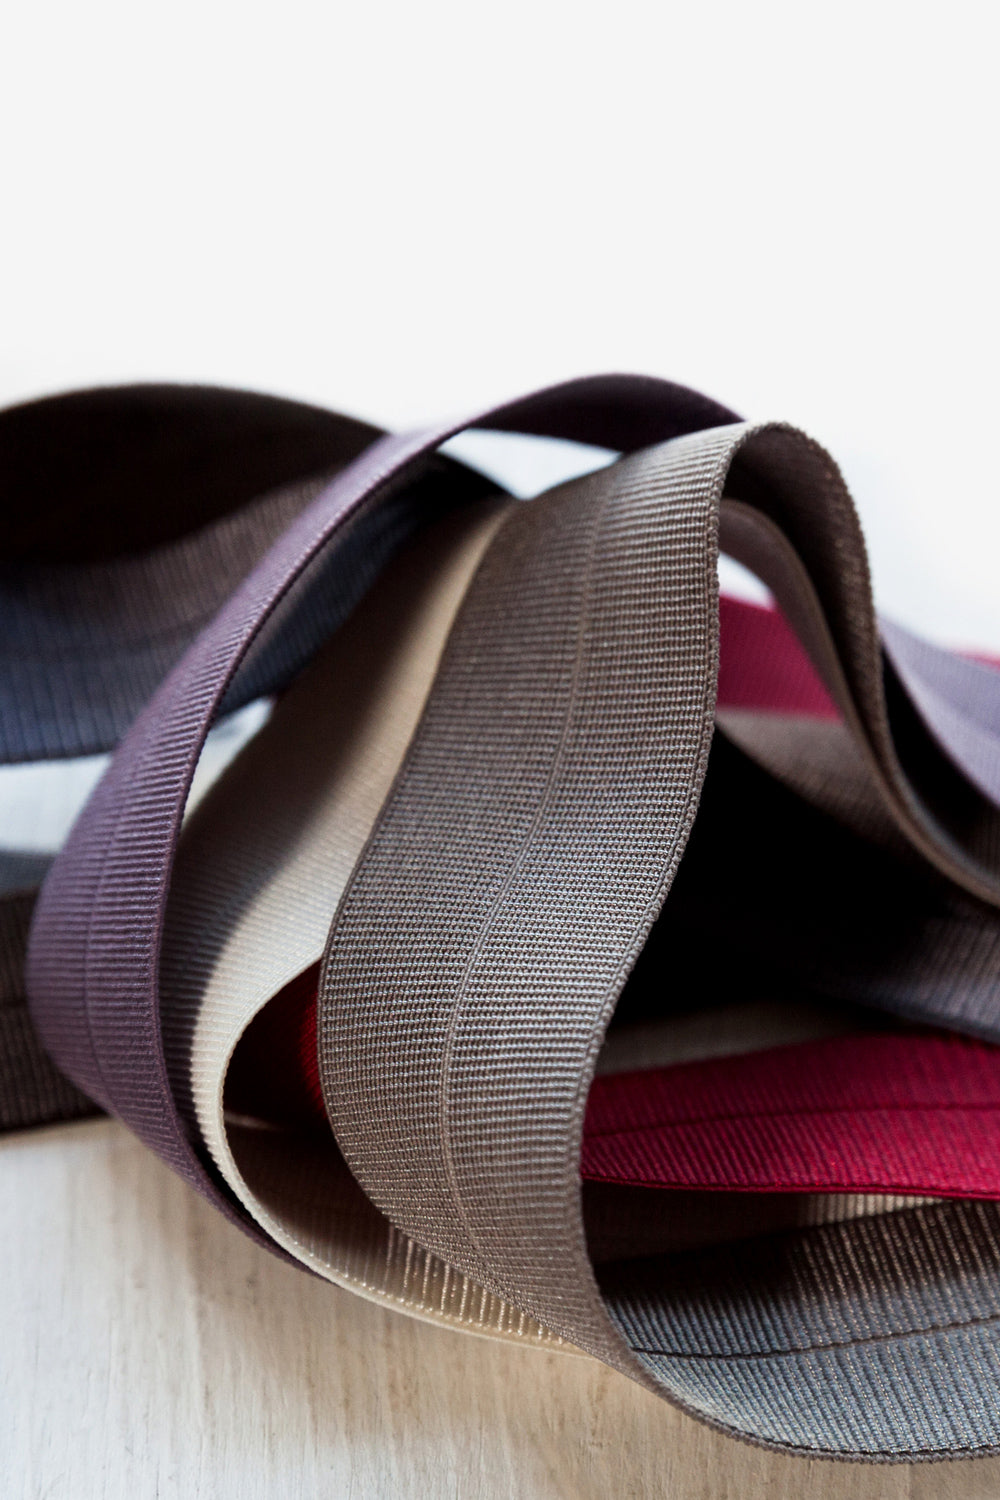 The School of Making Fold-Over Elastic Ribbon Assorted Tonal Colors for Hand-Sewn DIY Clothing.